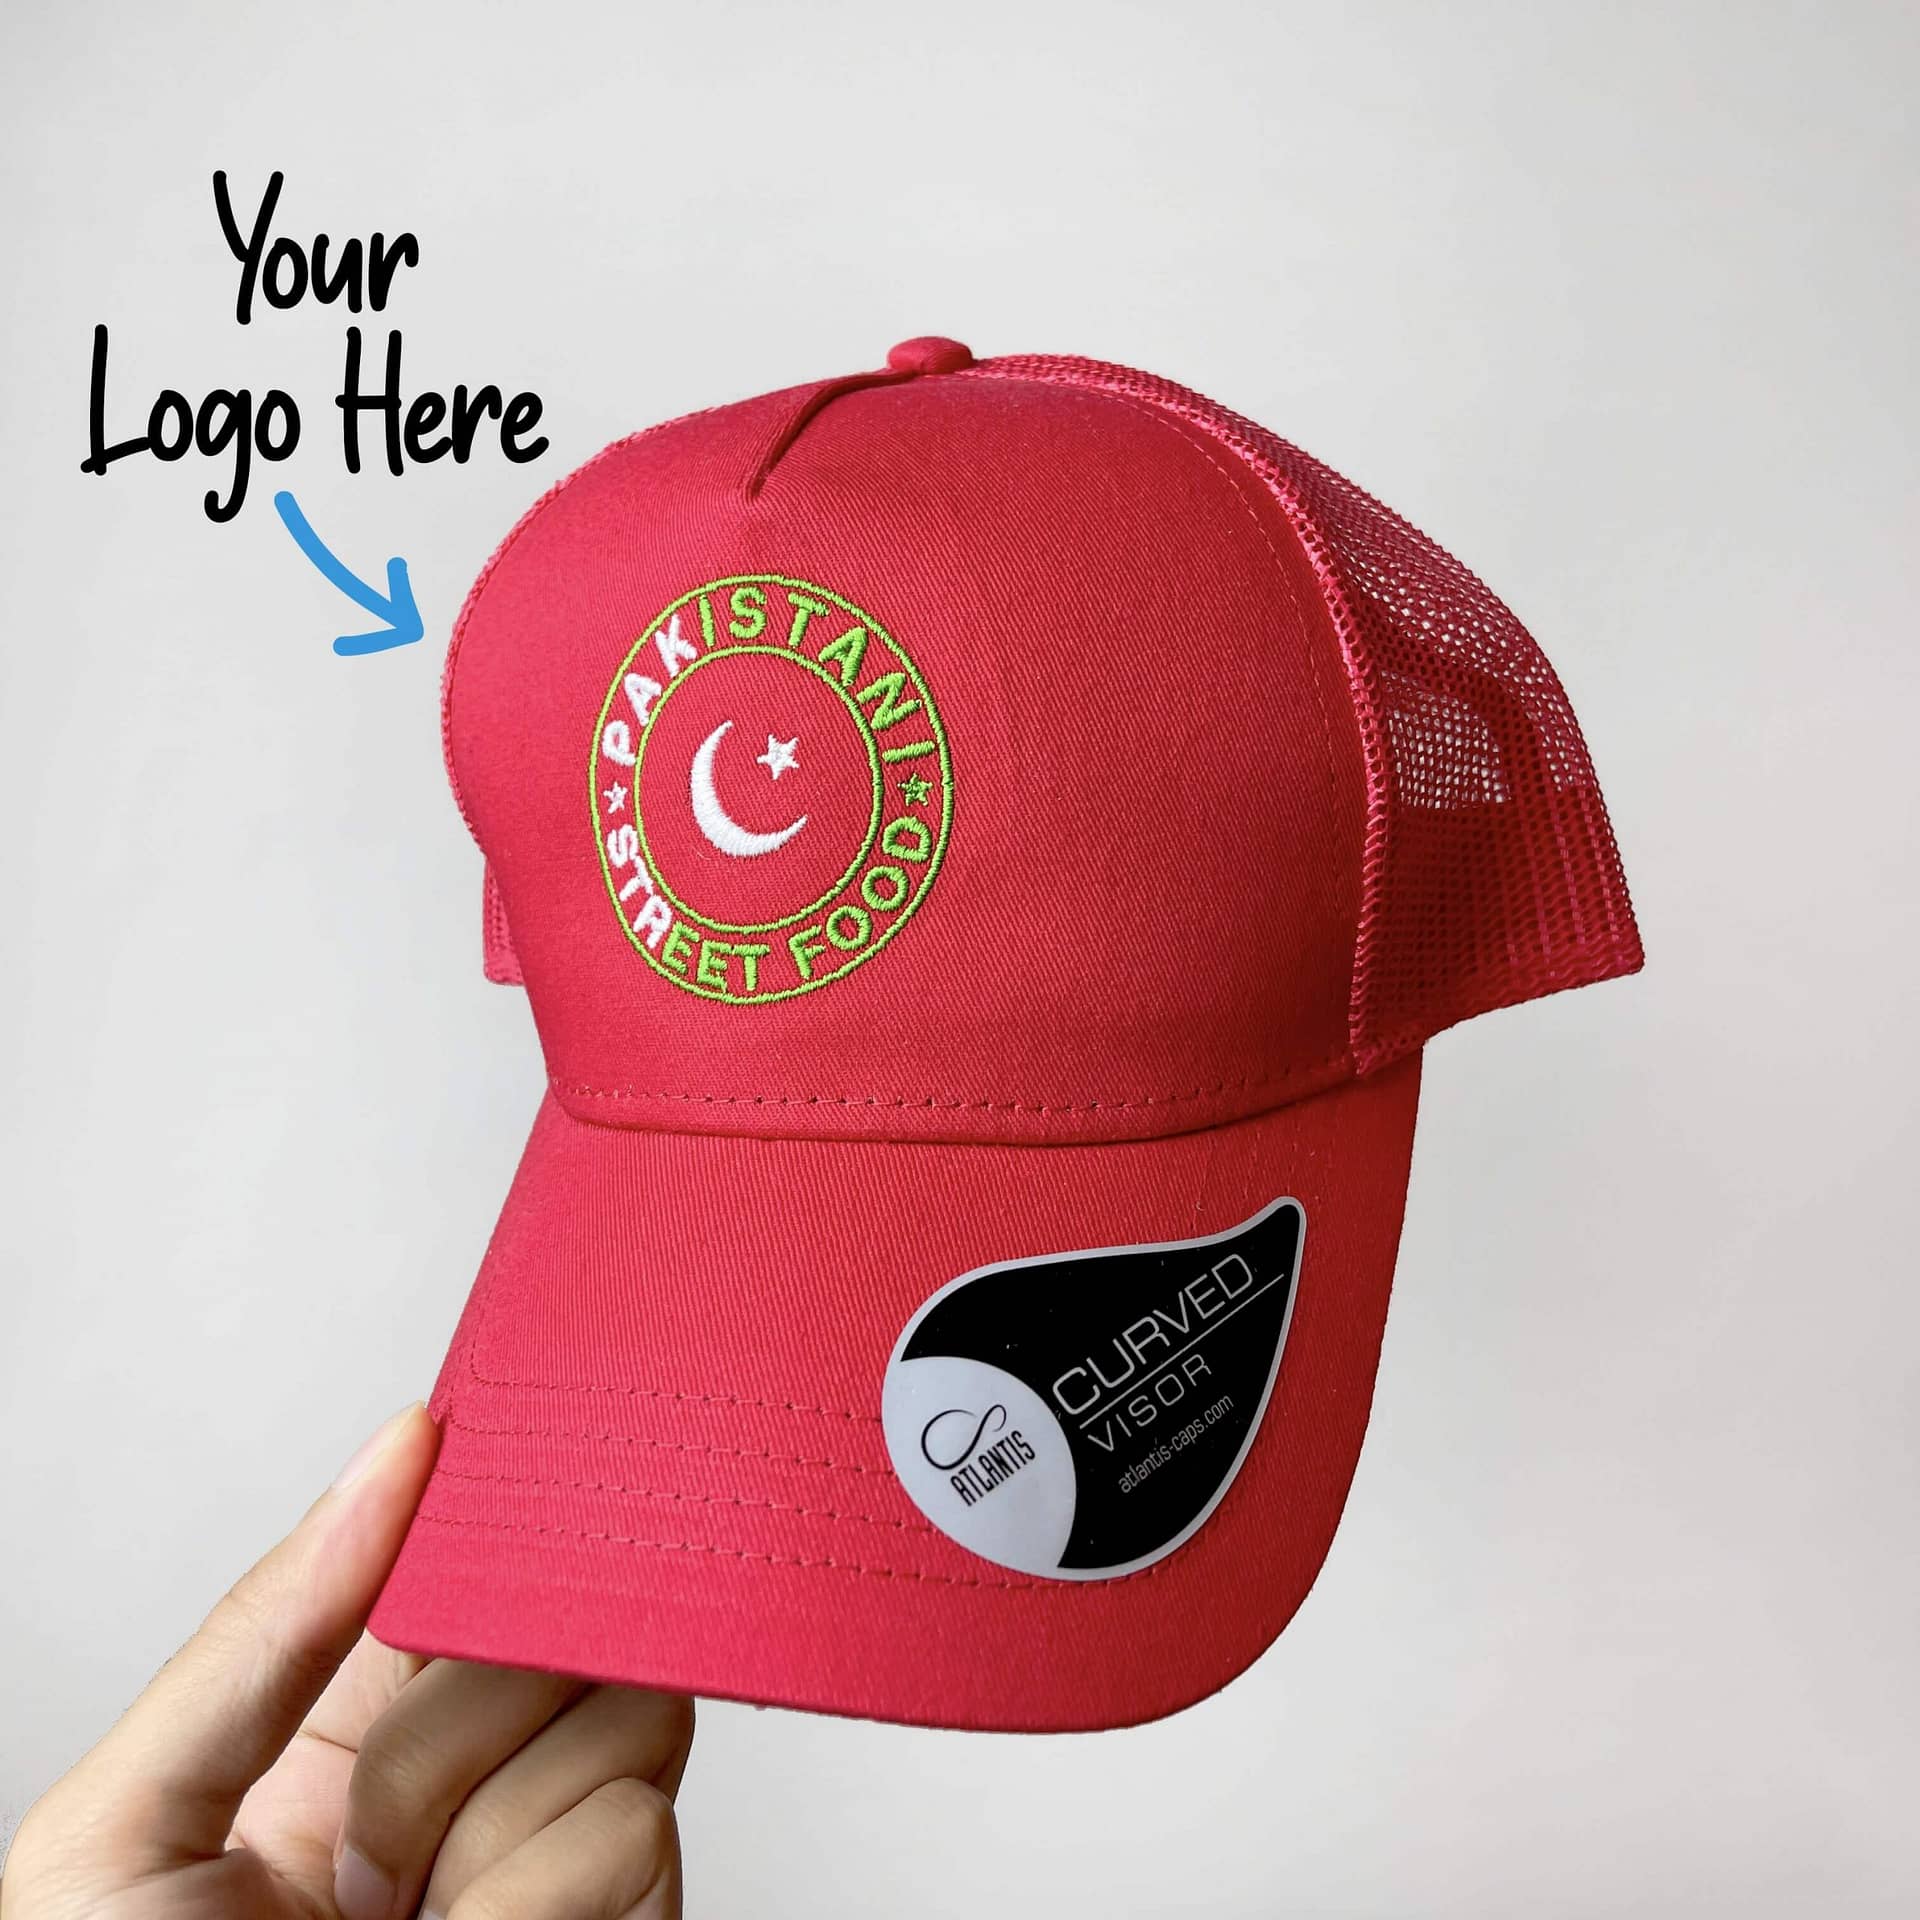 Custom Personalised Hat/Cap Embroidery OneClickPrinter 